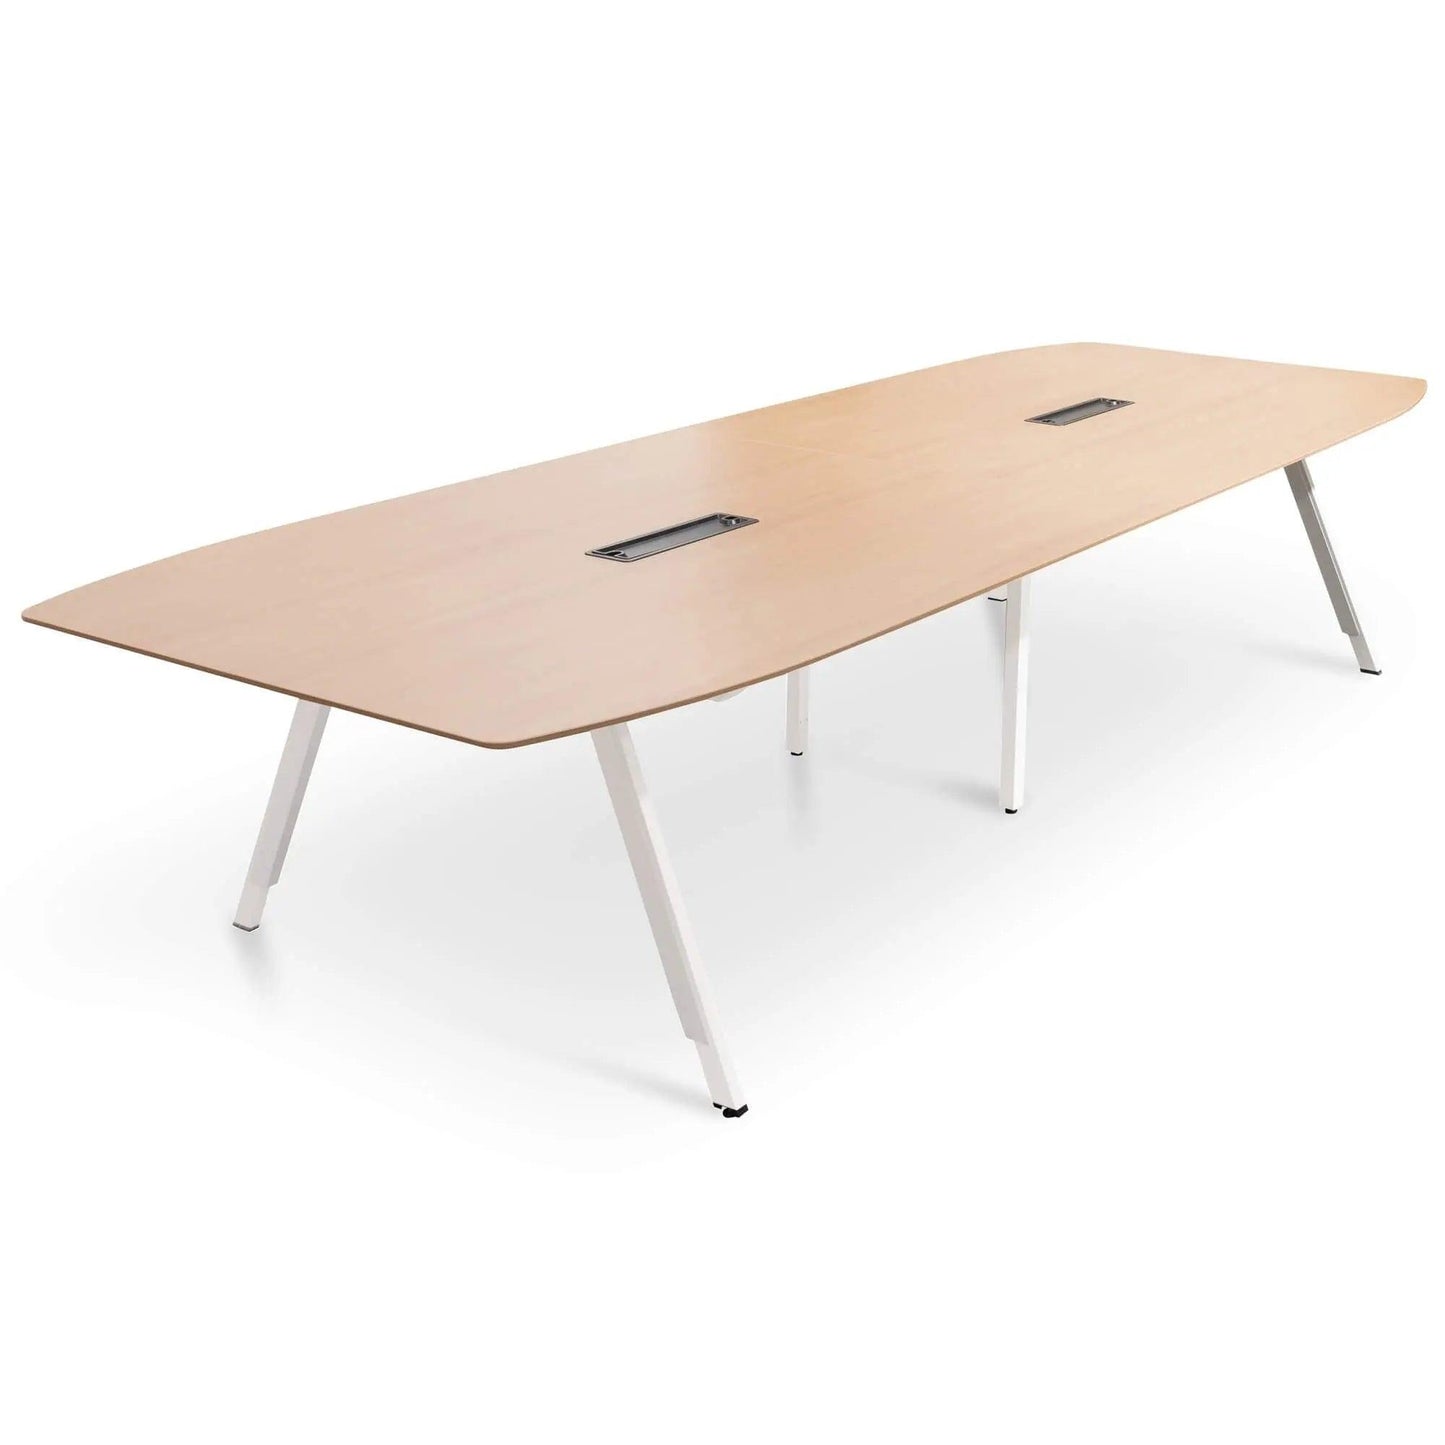 Calibre Boardroom Meeting Table - Natural OT2500-SN - Office DesksOT2500-SN 3